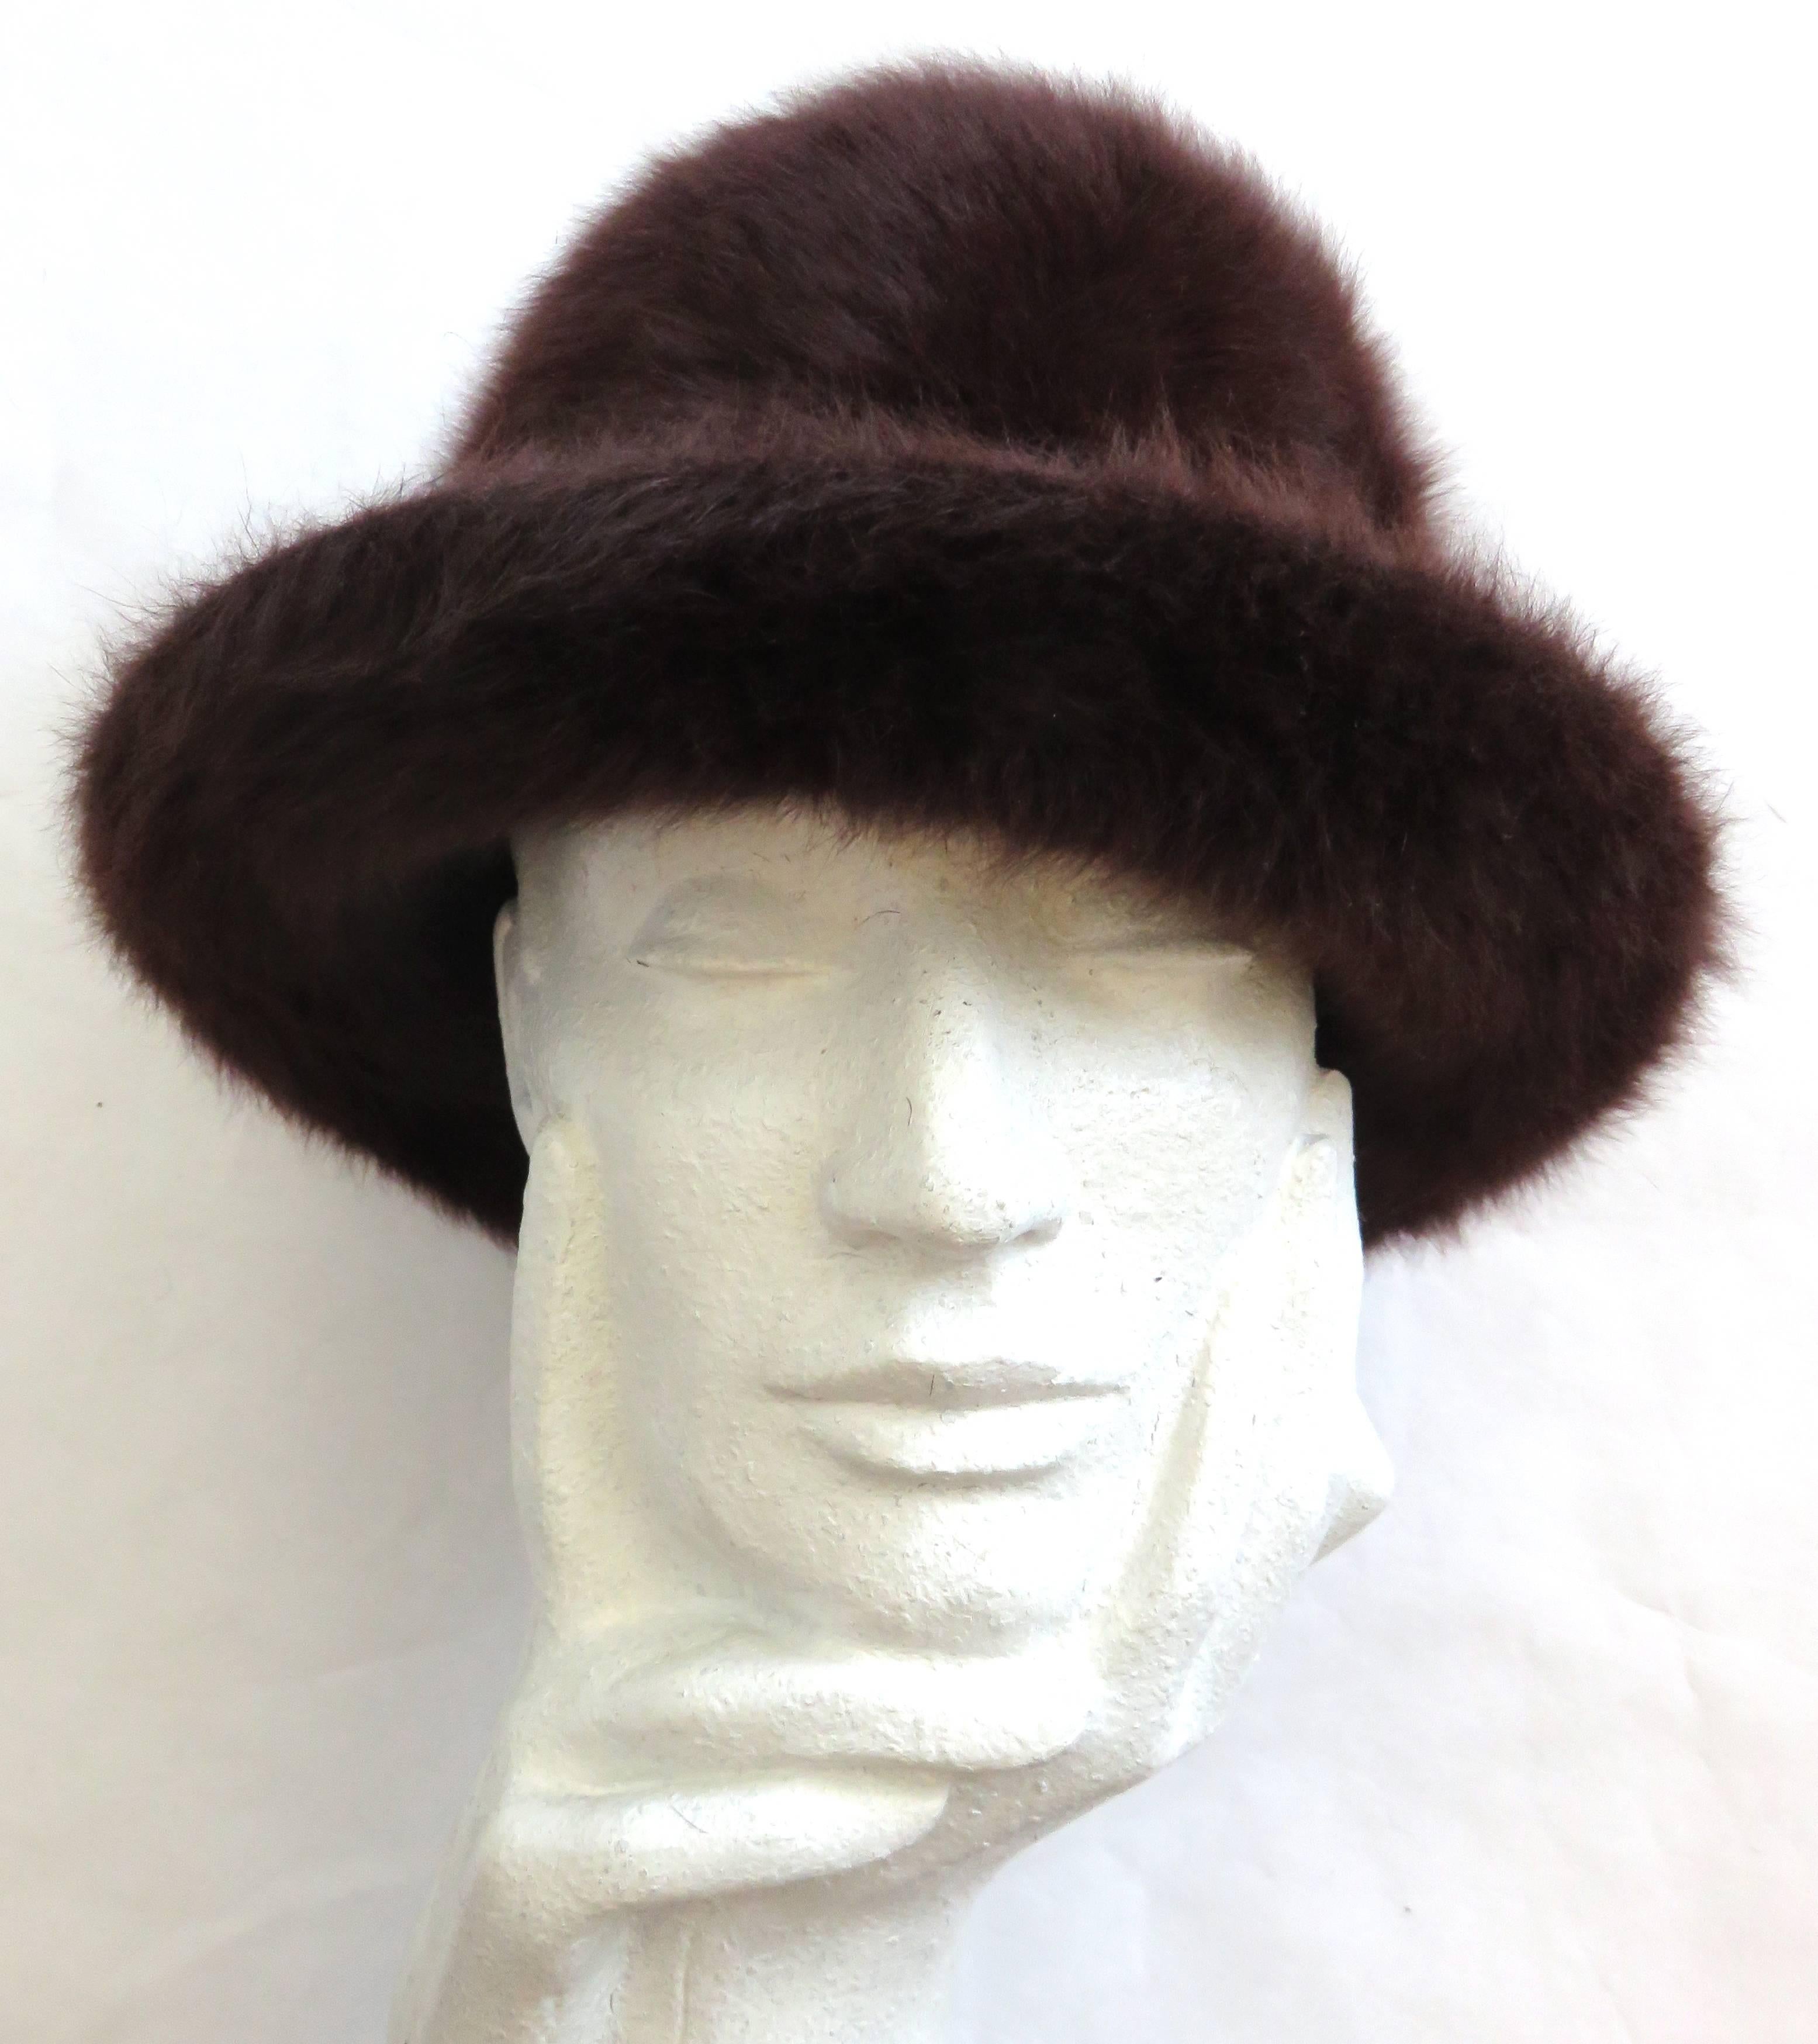 Worn once,'like new' condition, PHILIP TREACY, ultra-soft, and fluffy, mohair, bowler hat.

Soft, fur-like hand-feel in dark chocolate brown.

Metal unicorn logo charm at side.

Internal wire edge brim for shape.

Fully lined in logo